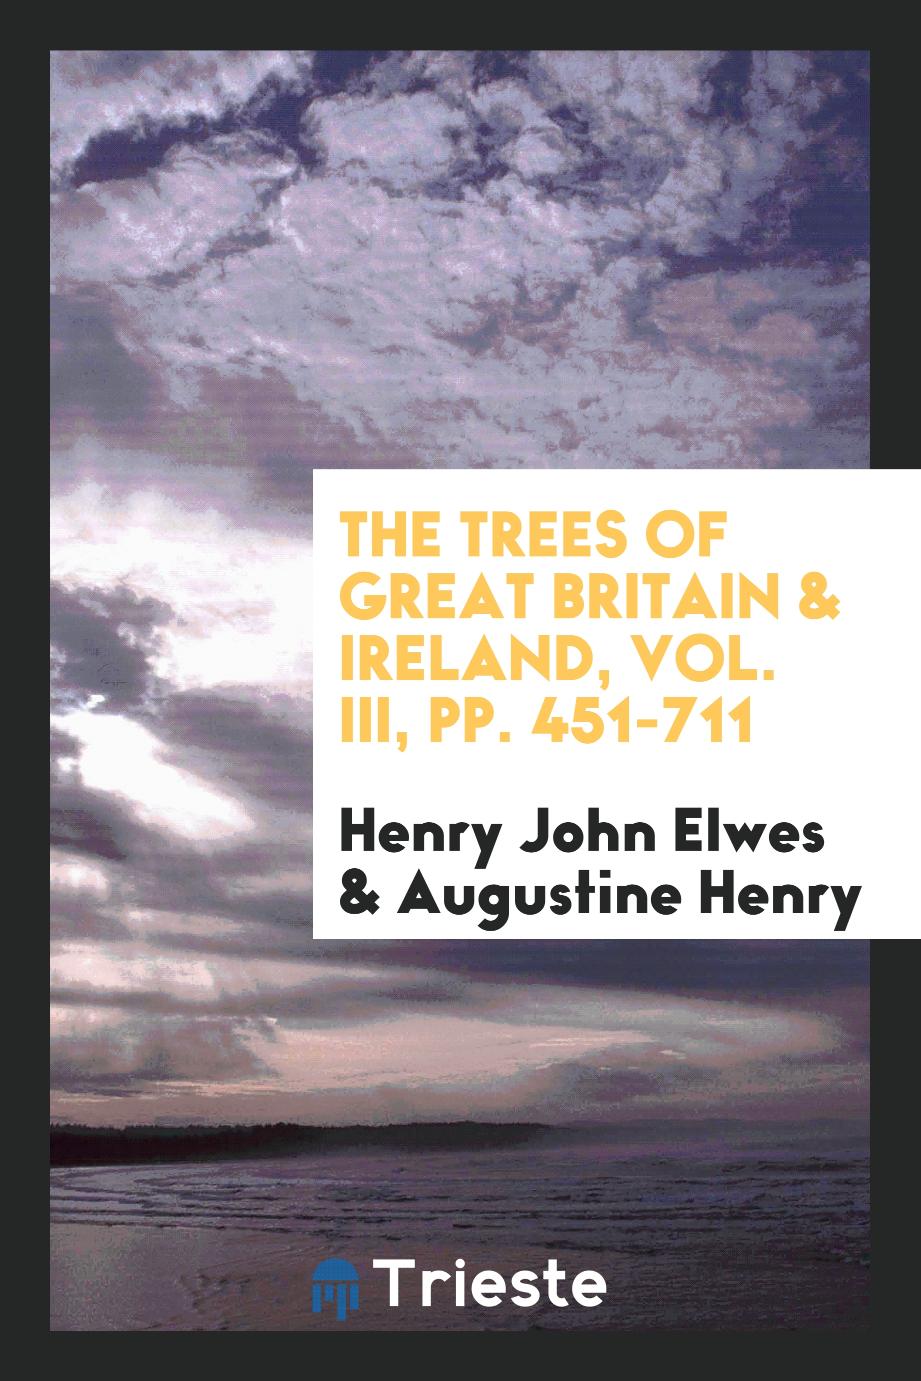 The trees of Great Britain & Ireland, Vol. III, pp. 451-711